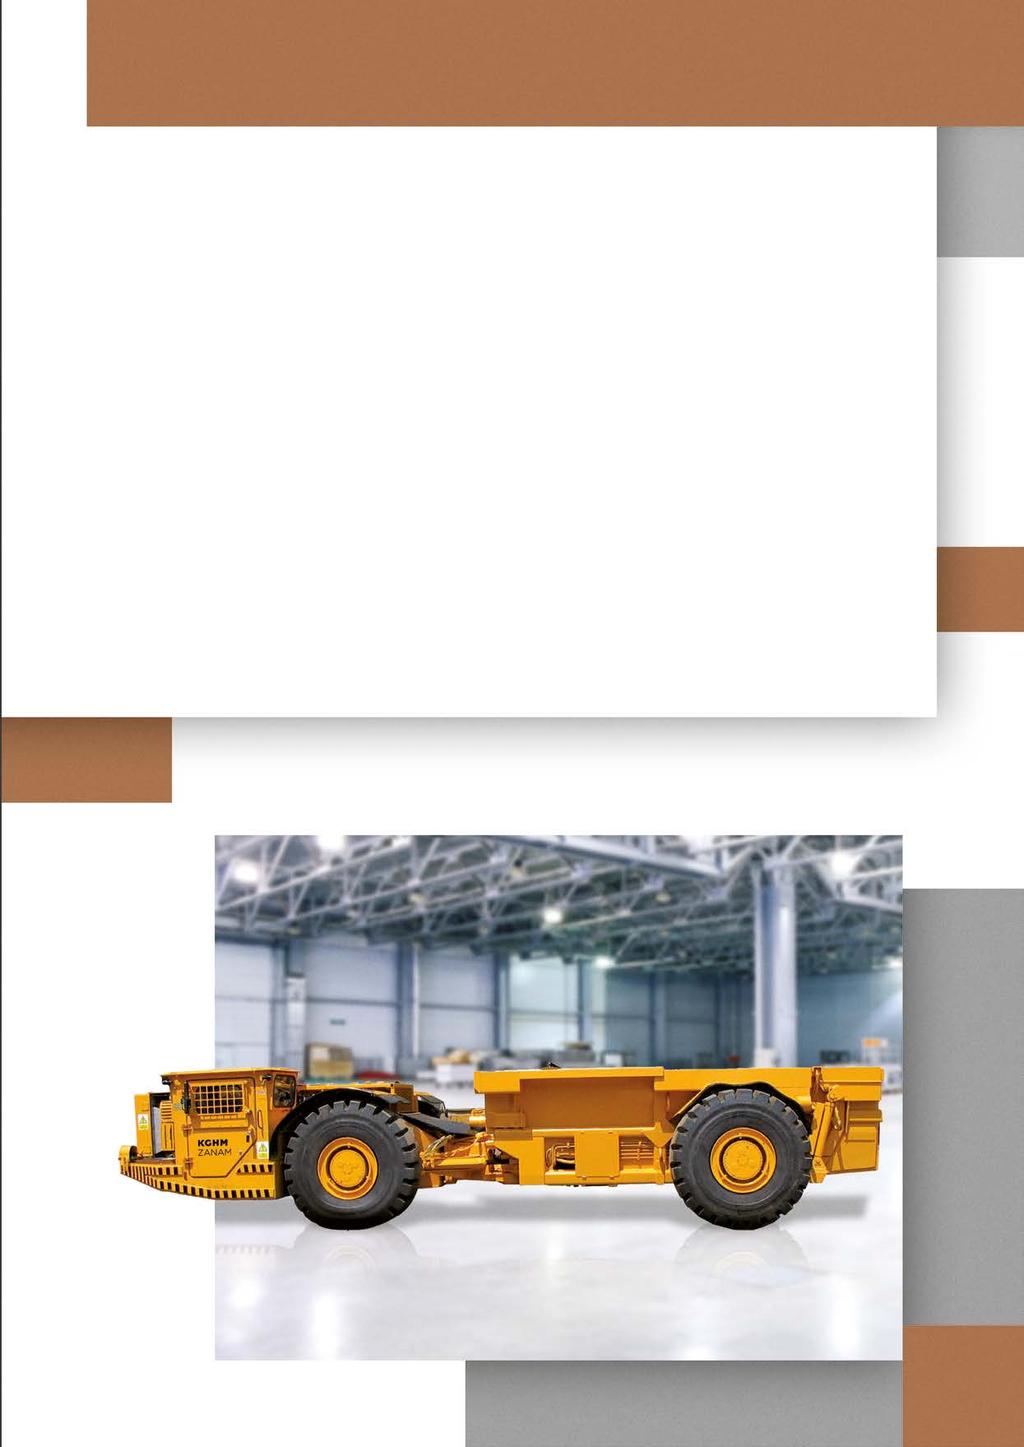 Haul trucks produced by KGHM ZANAM are designed for haulage of output from mine faces and transporting it to handling points in mineral ore mines, not subject to explosion risk.